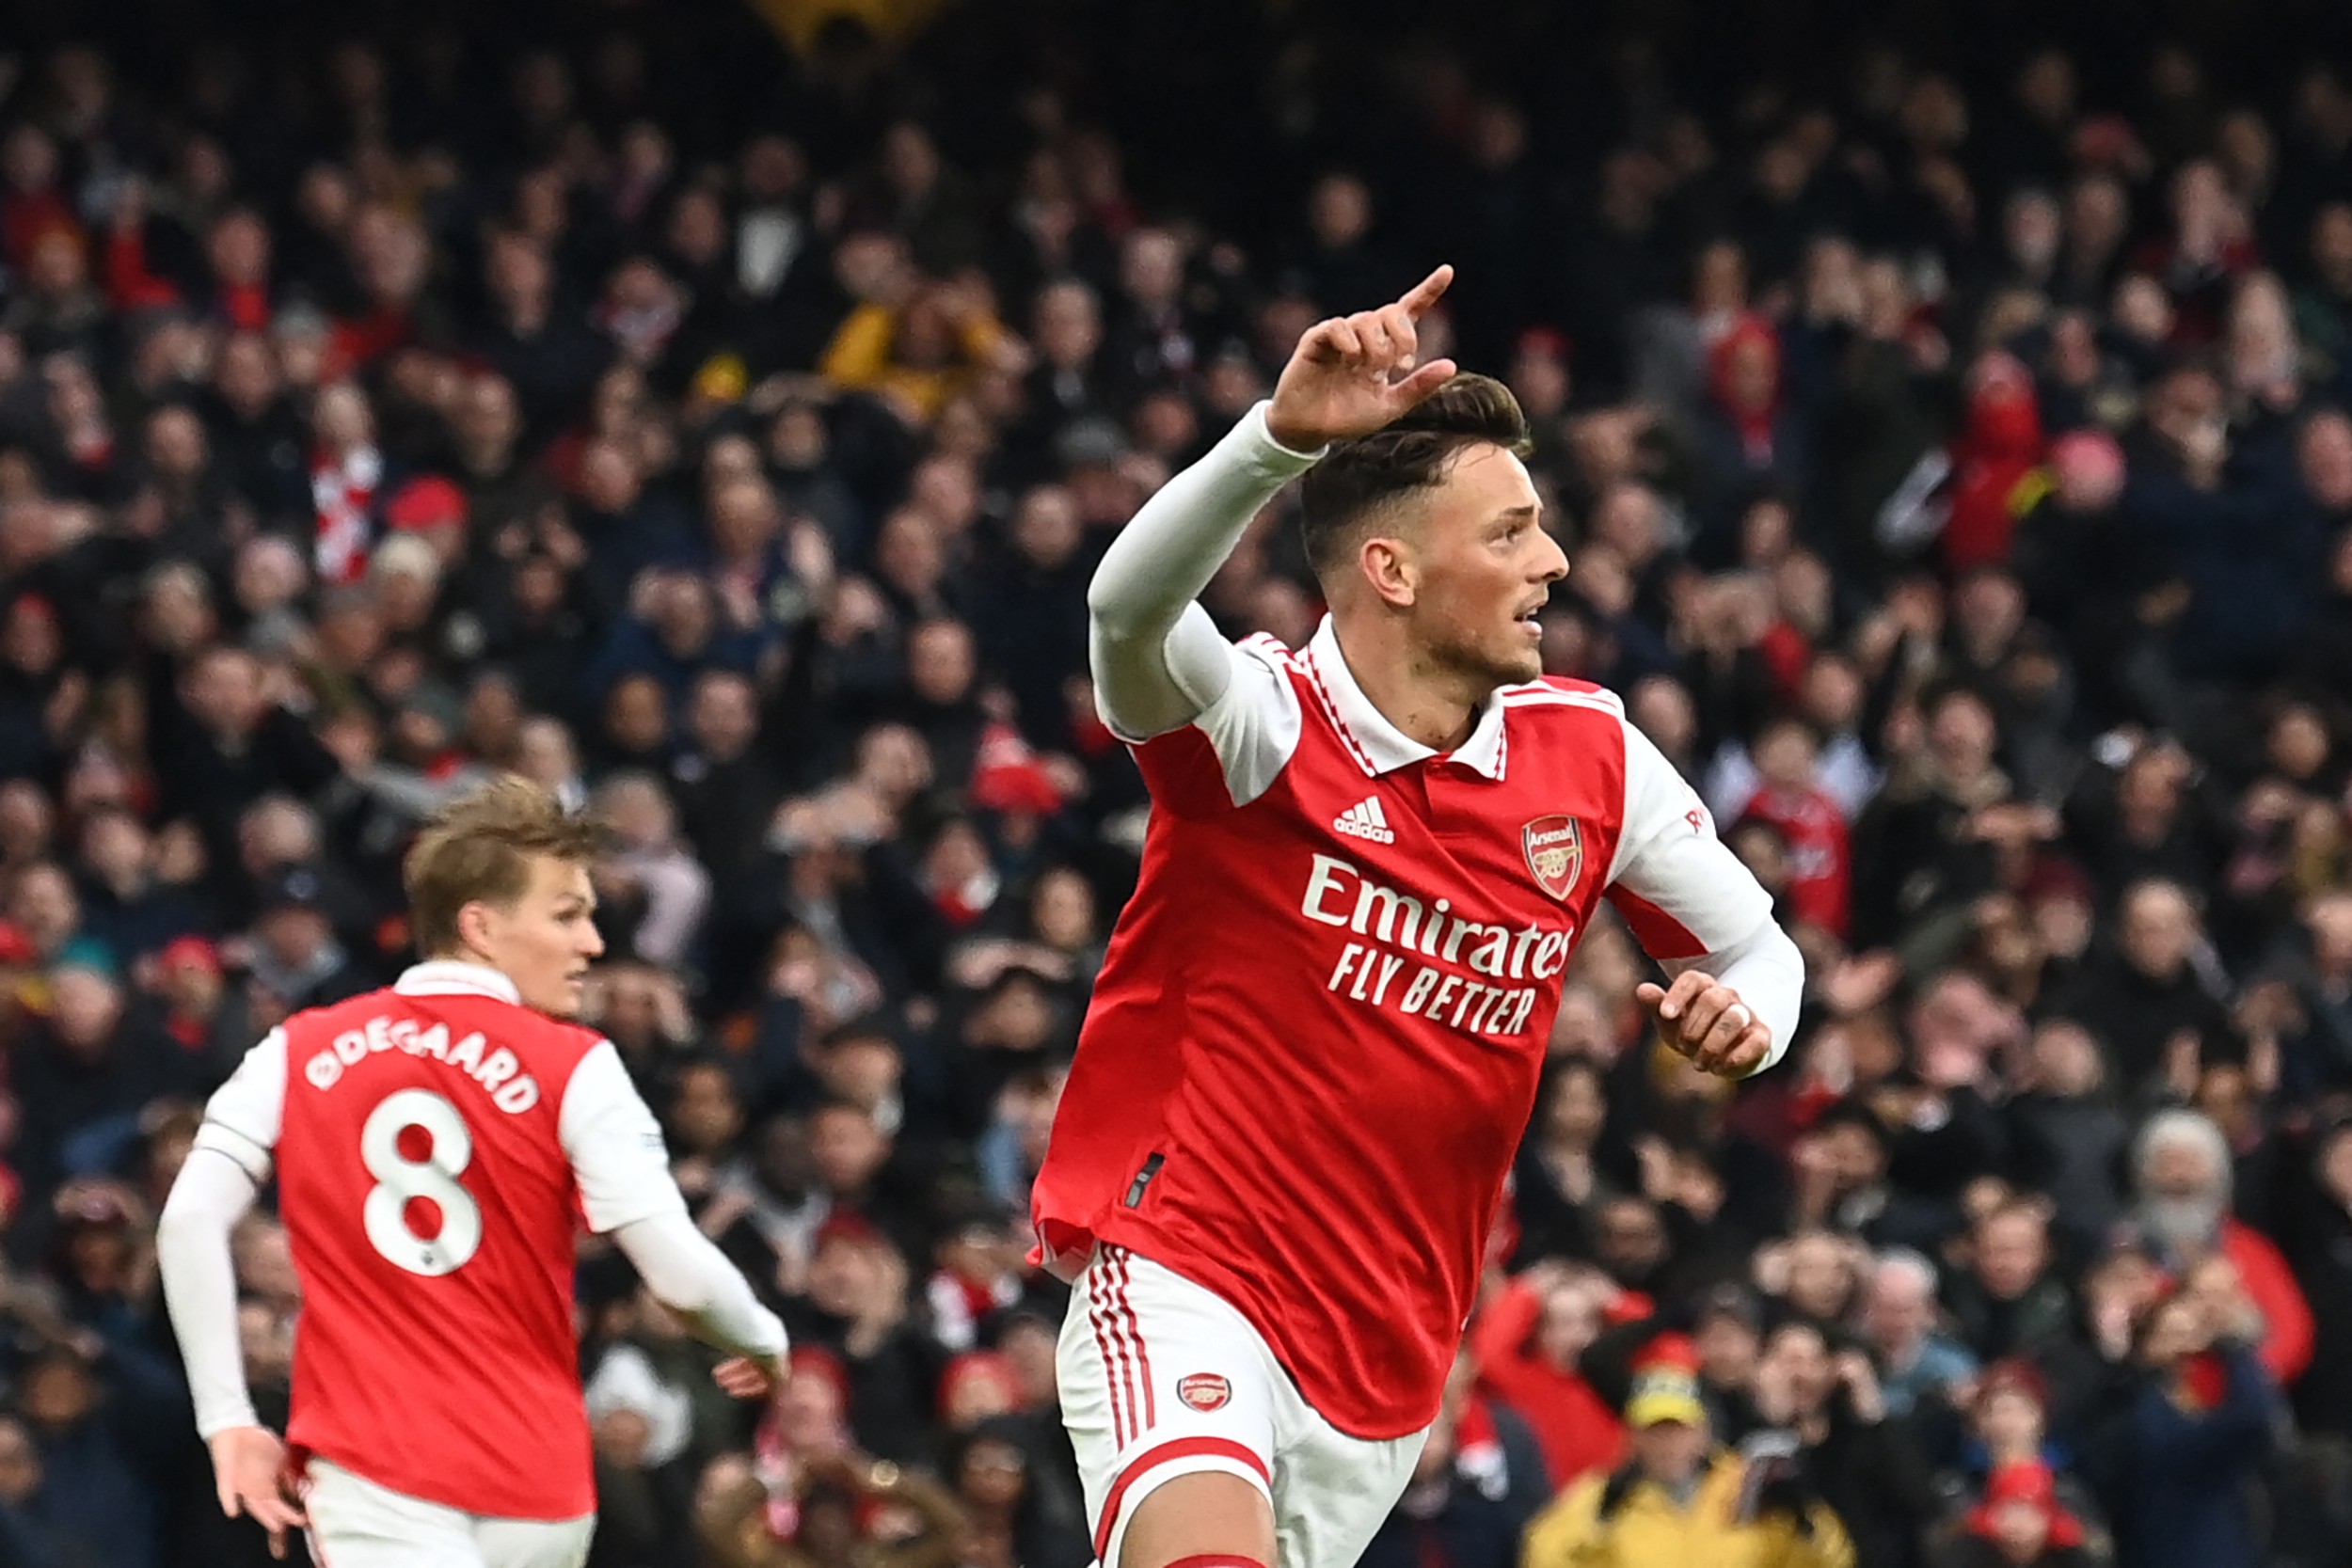 Arsenal's English defender Ben White (R) celebrates after scoring his team second goal during the English Premier League football match between Arsenal and Bournemouth at the Emirates Stadium in London on March 4, 2023. (Photo by GLYN KIRK/AFP via Getty Images)